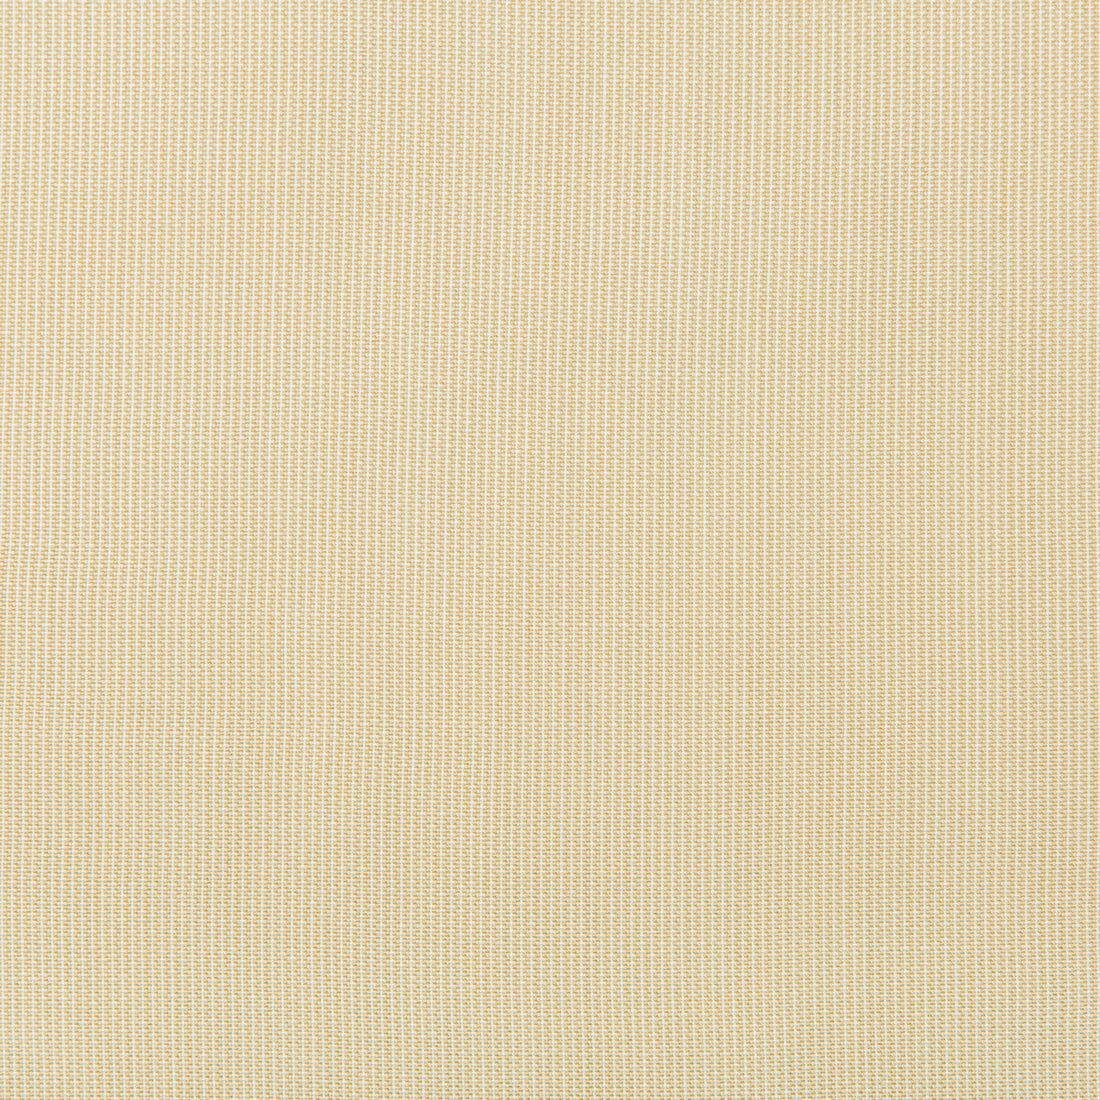 Kravet Basics fabric in 36820-16 color - pattern 36820.16.0 - by Kravet Basics in the Indoor / Outdoor collection